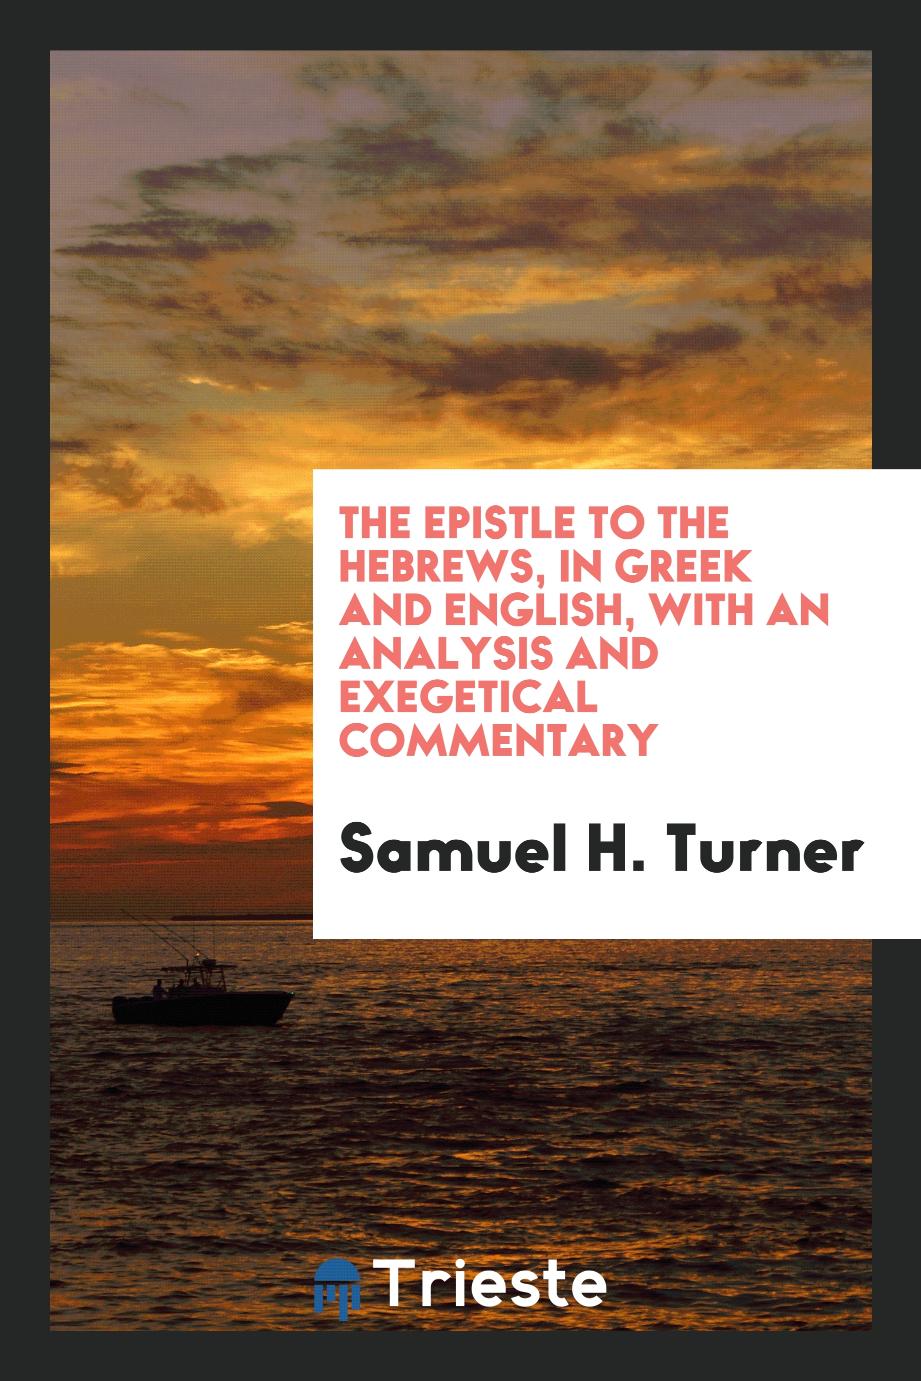 Samuel H. Turner - The Epistle to the Hebrews, in Greek and English, with an Analysis and Exegetical Commentary